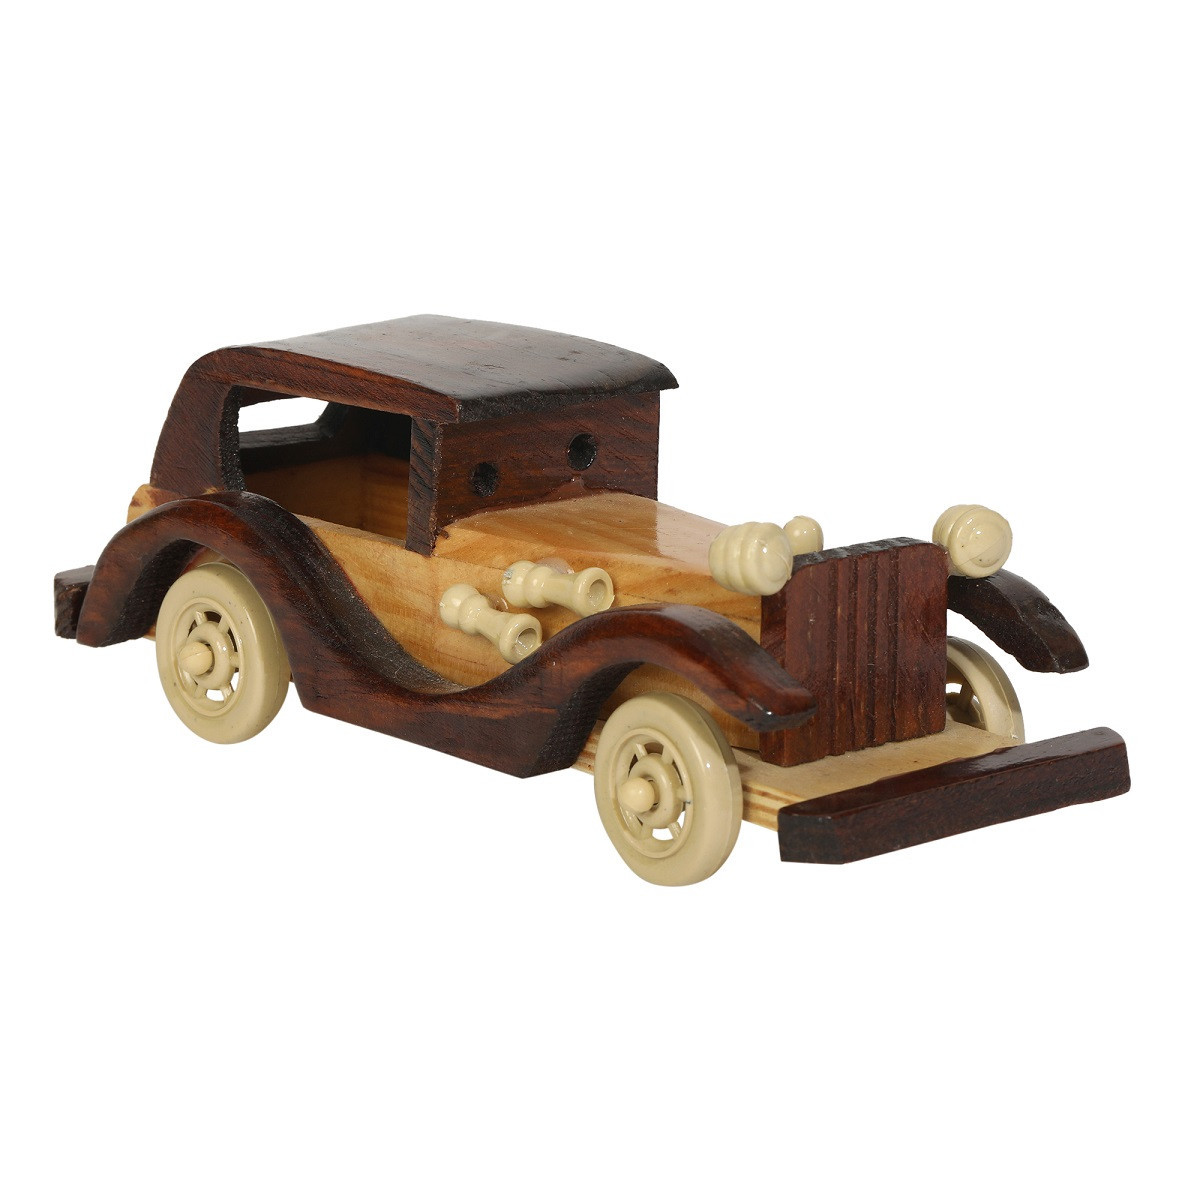 Wooden Vintage Style Classic Car from Chhinapatna Toys : 200g